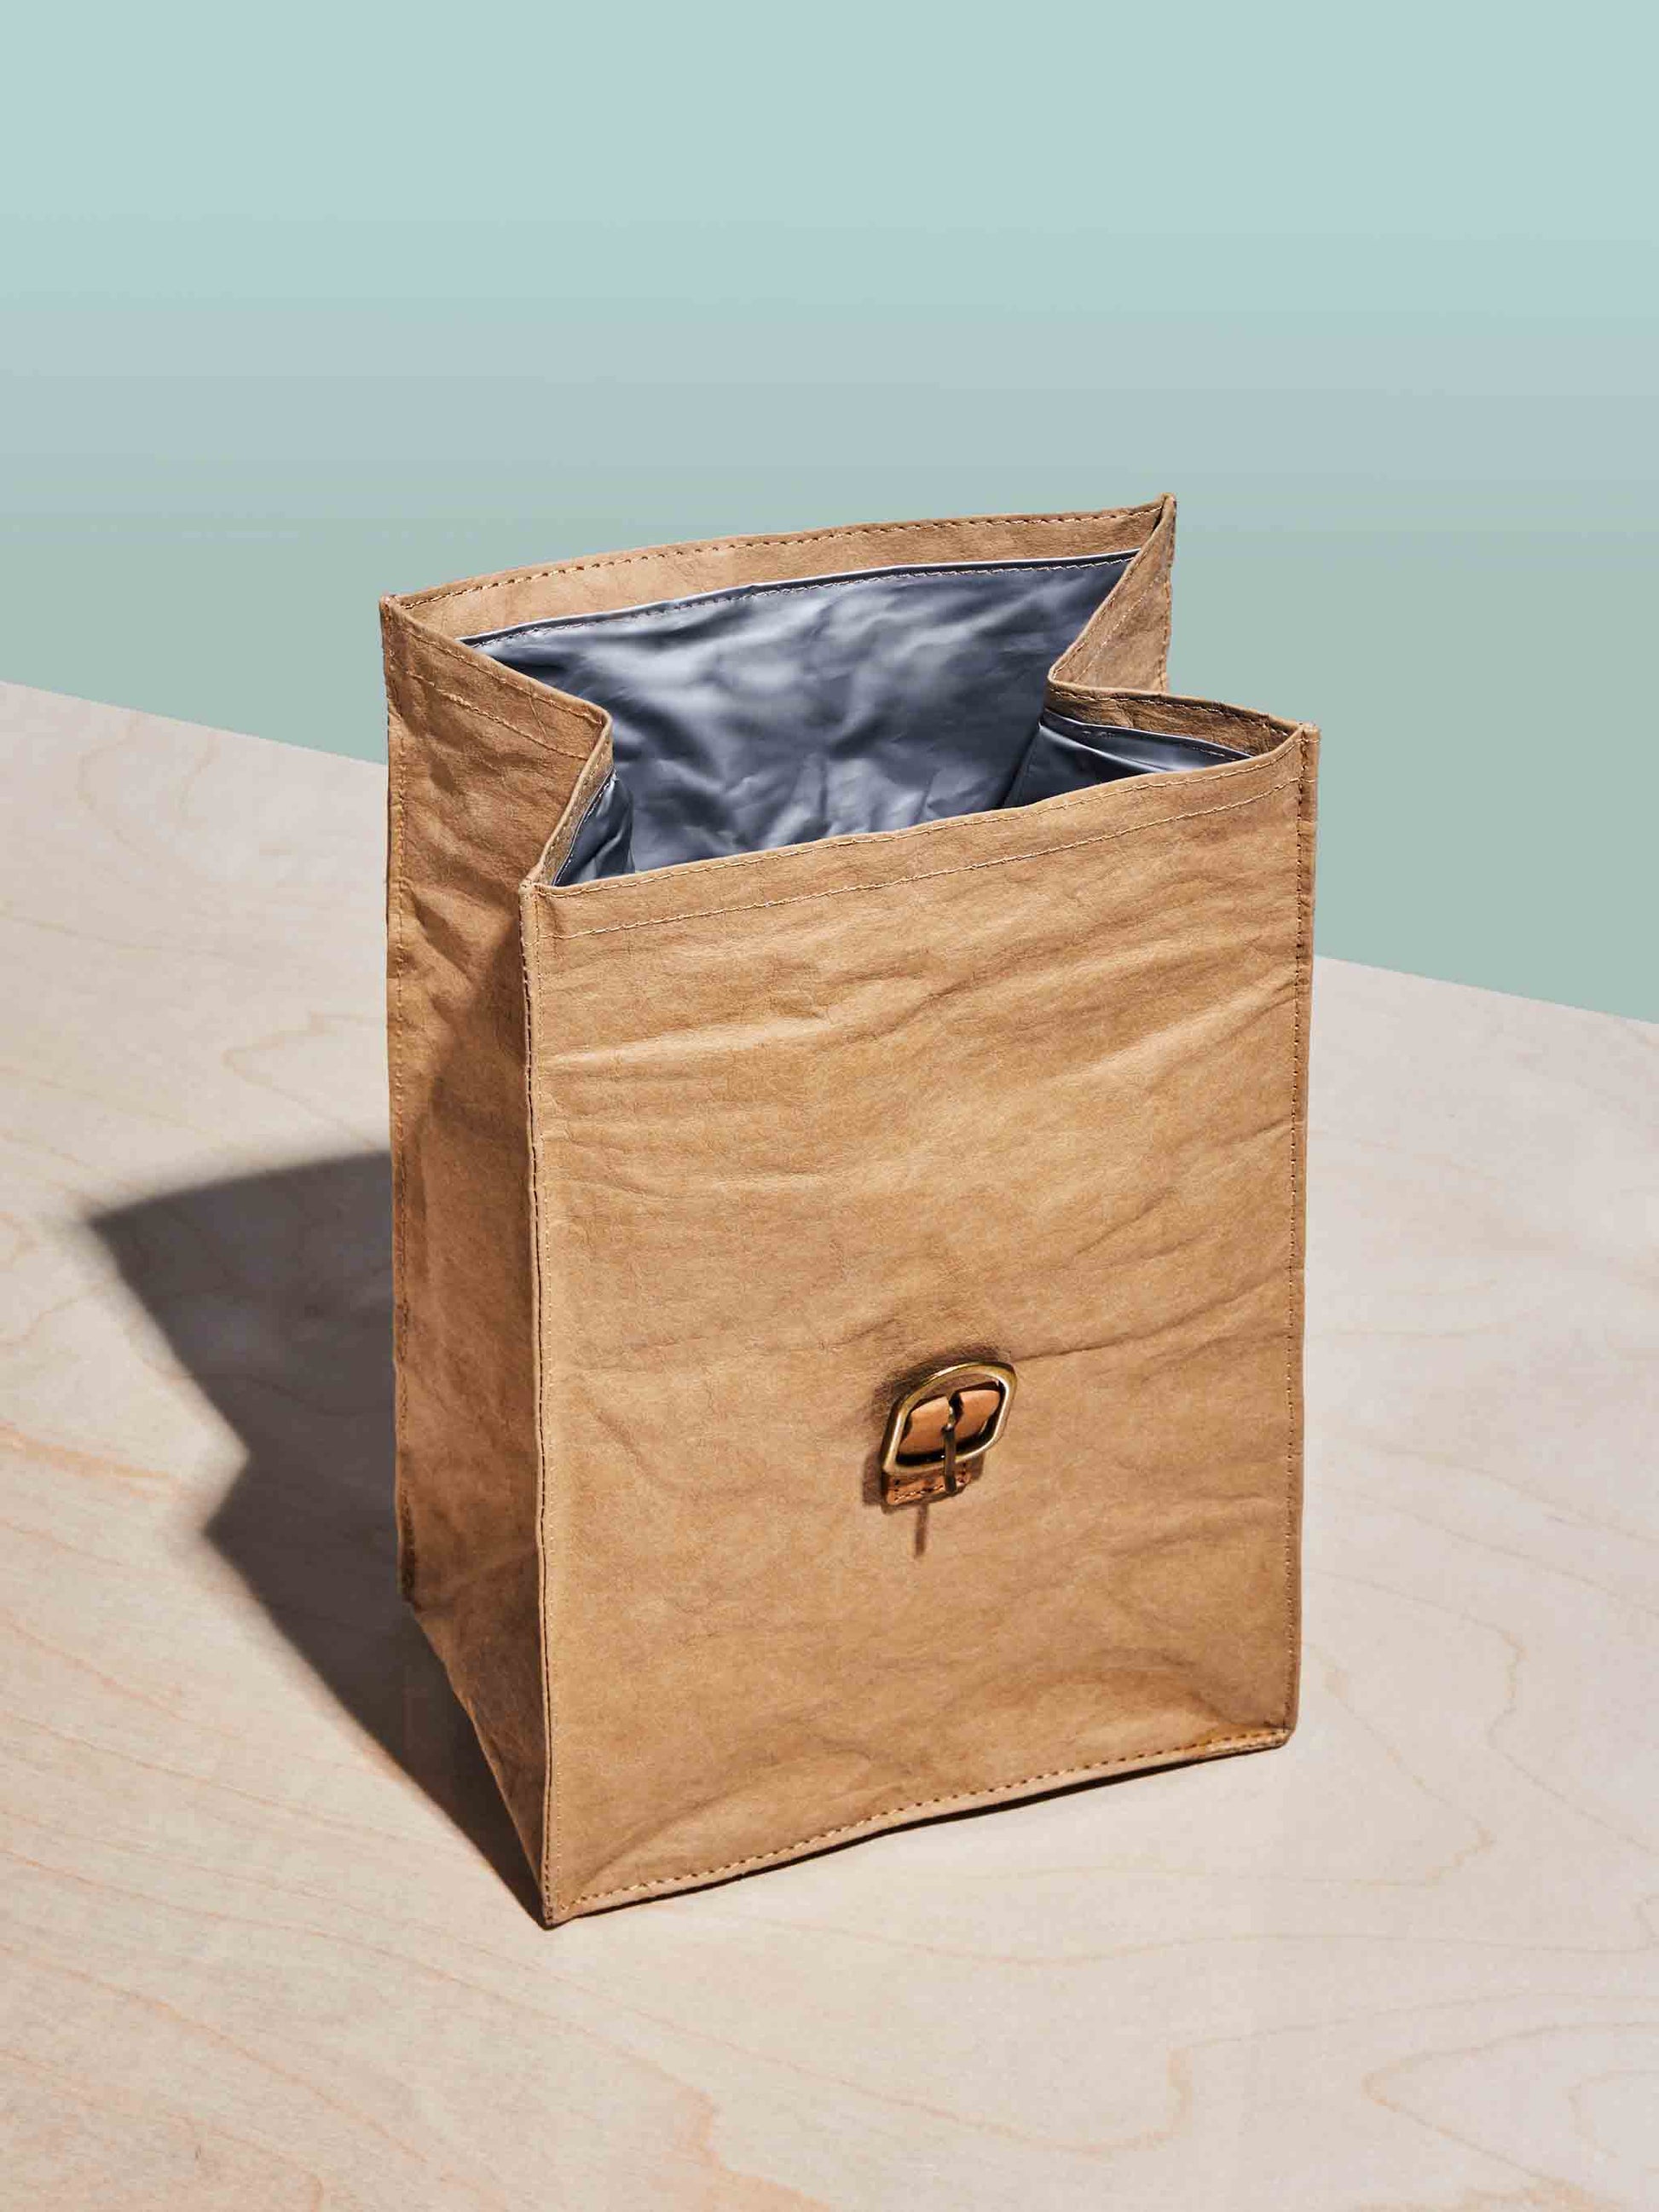 Stylish Lunch Bags : Stylish Lunch Bags